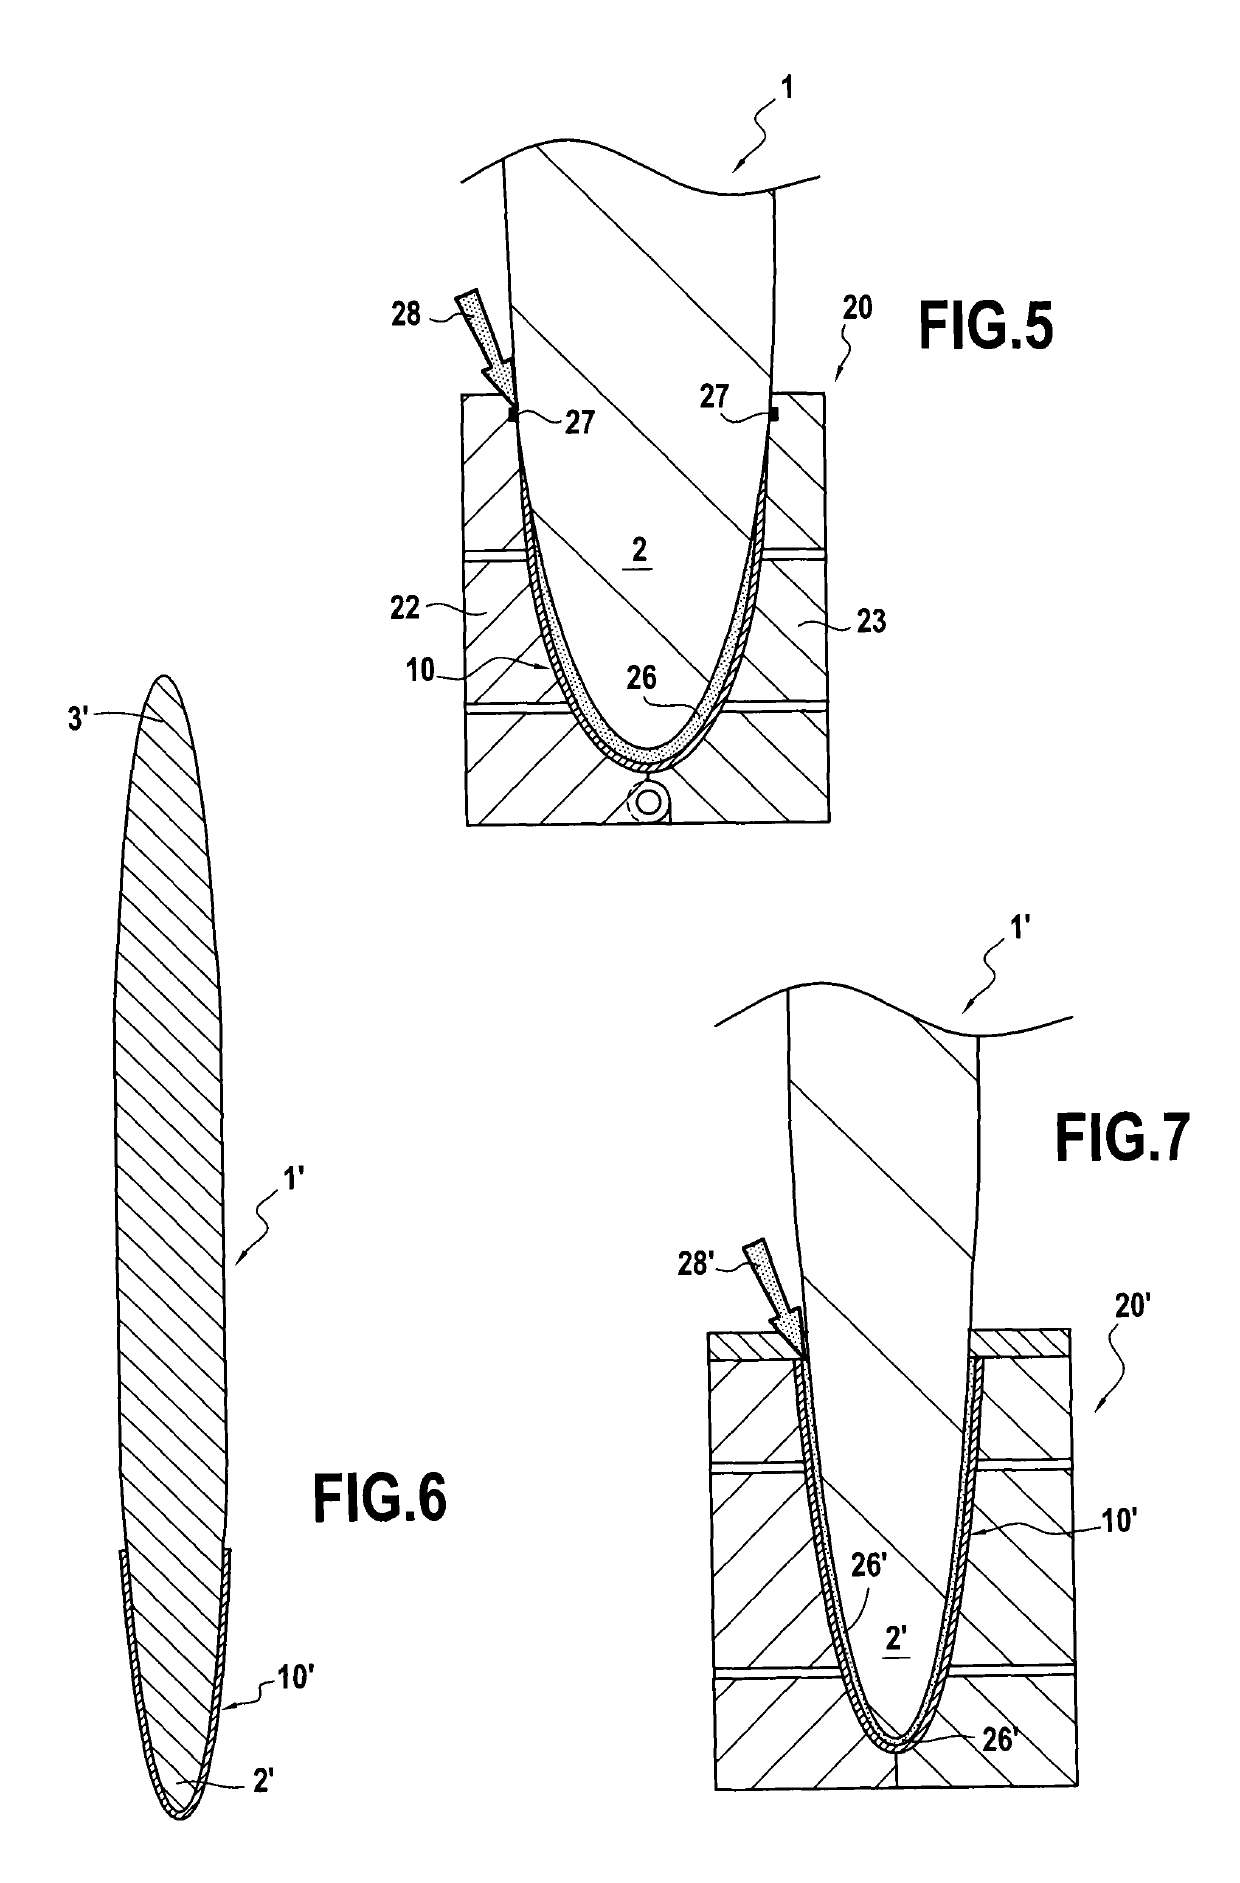 Method of fastening structural metal reinforcement on a portion of a gas turbine blade made of composite material, and an injection mold for performing such a method